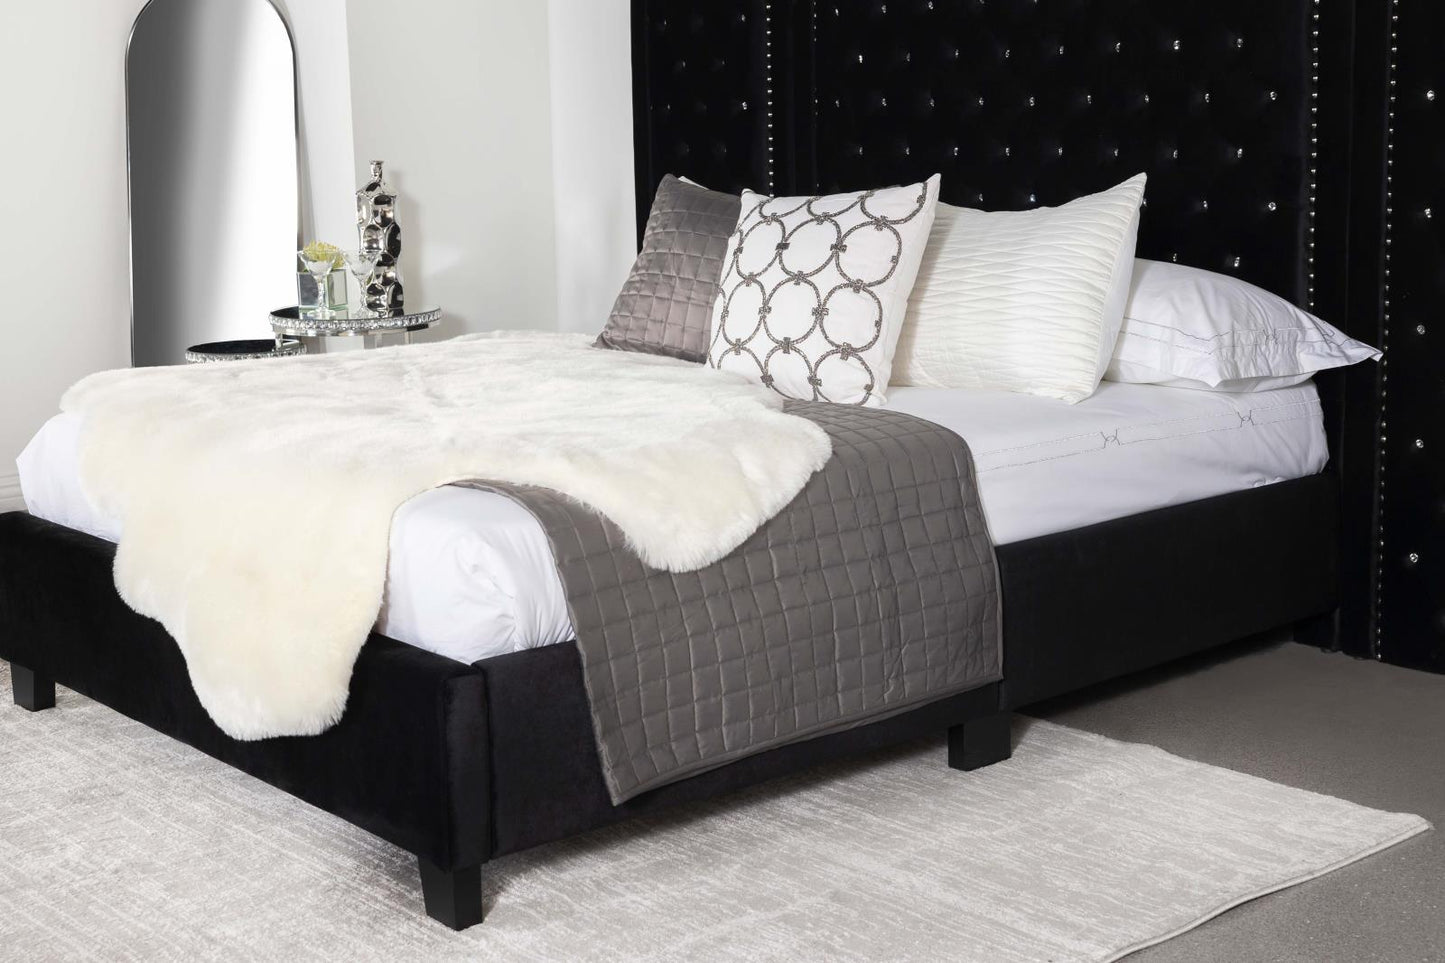 Hailey Upholstered Platform Queen Bed with Wall Panel Black